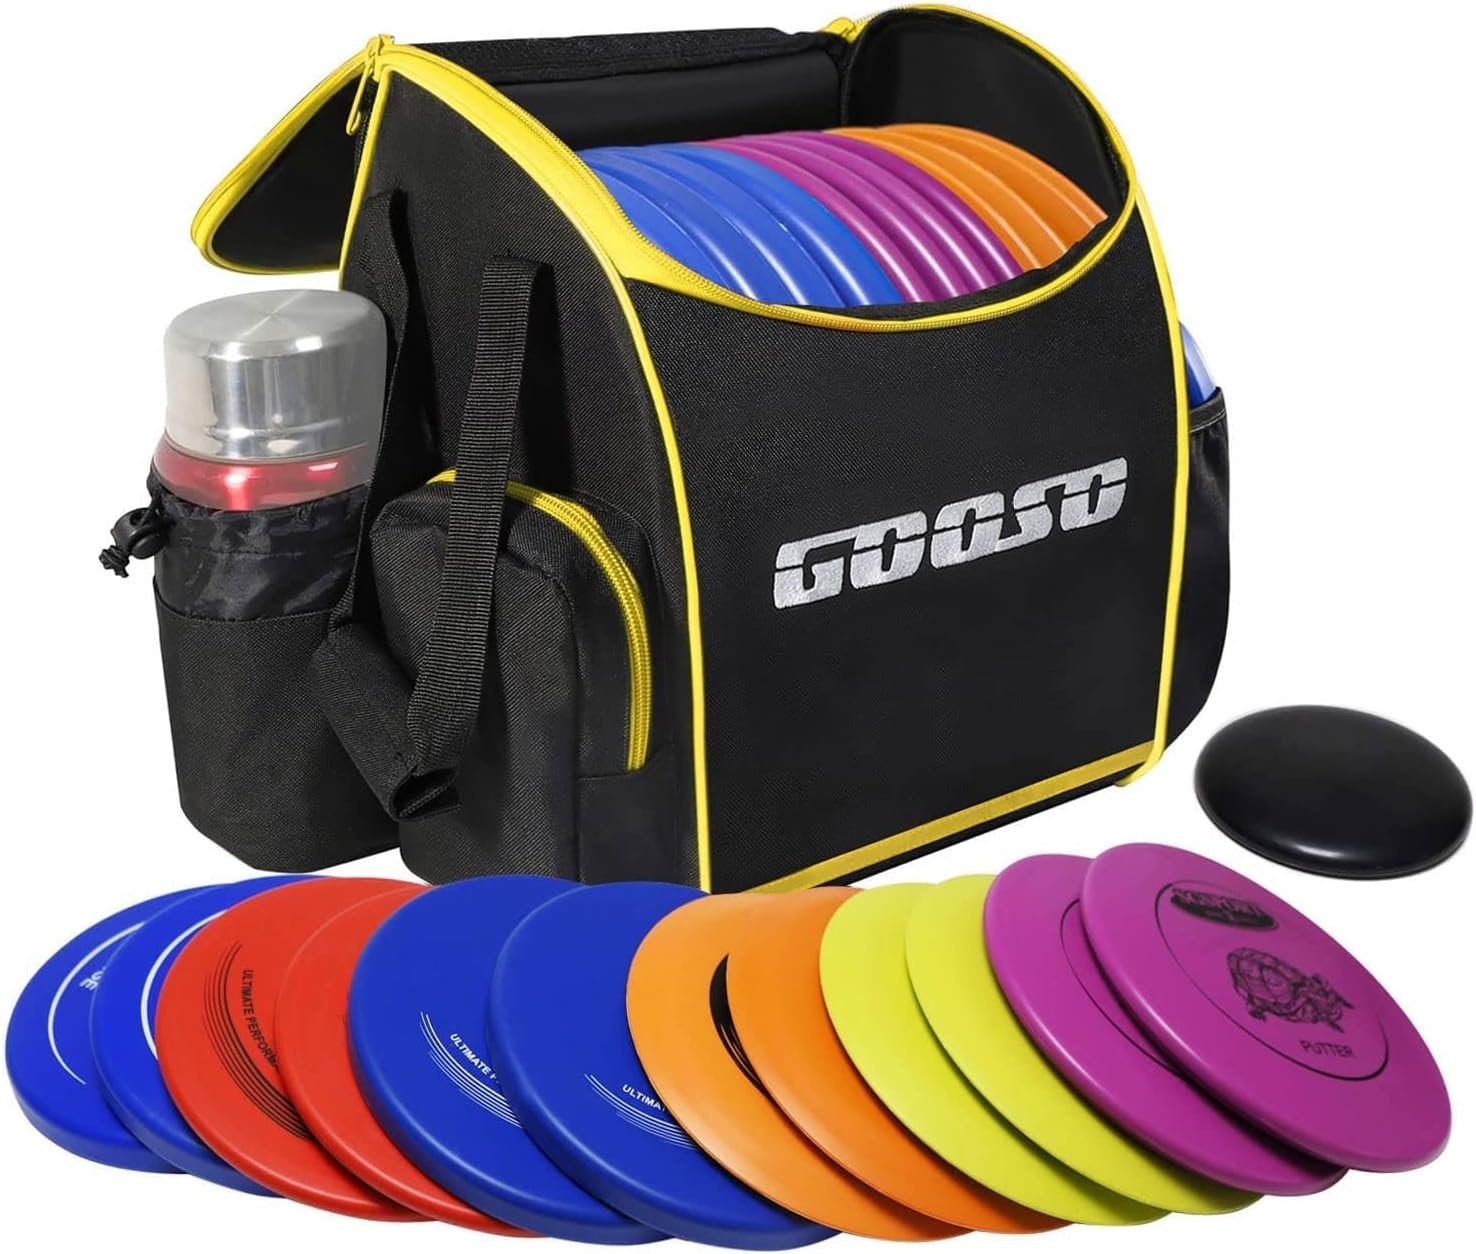 Disc Golf Set with Bag - 12 PCS Flying Disc Golf Discs for Beginner with Putter, Midrange, Driver | Portable Disc Golf Backpack Holds 28+ Discs Free Stand Bag Design for Convenient Use